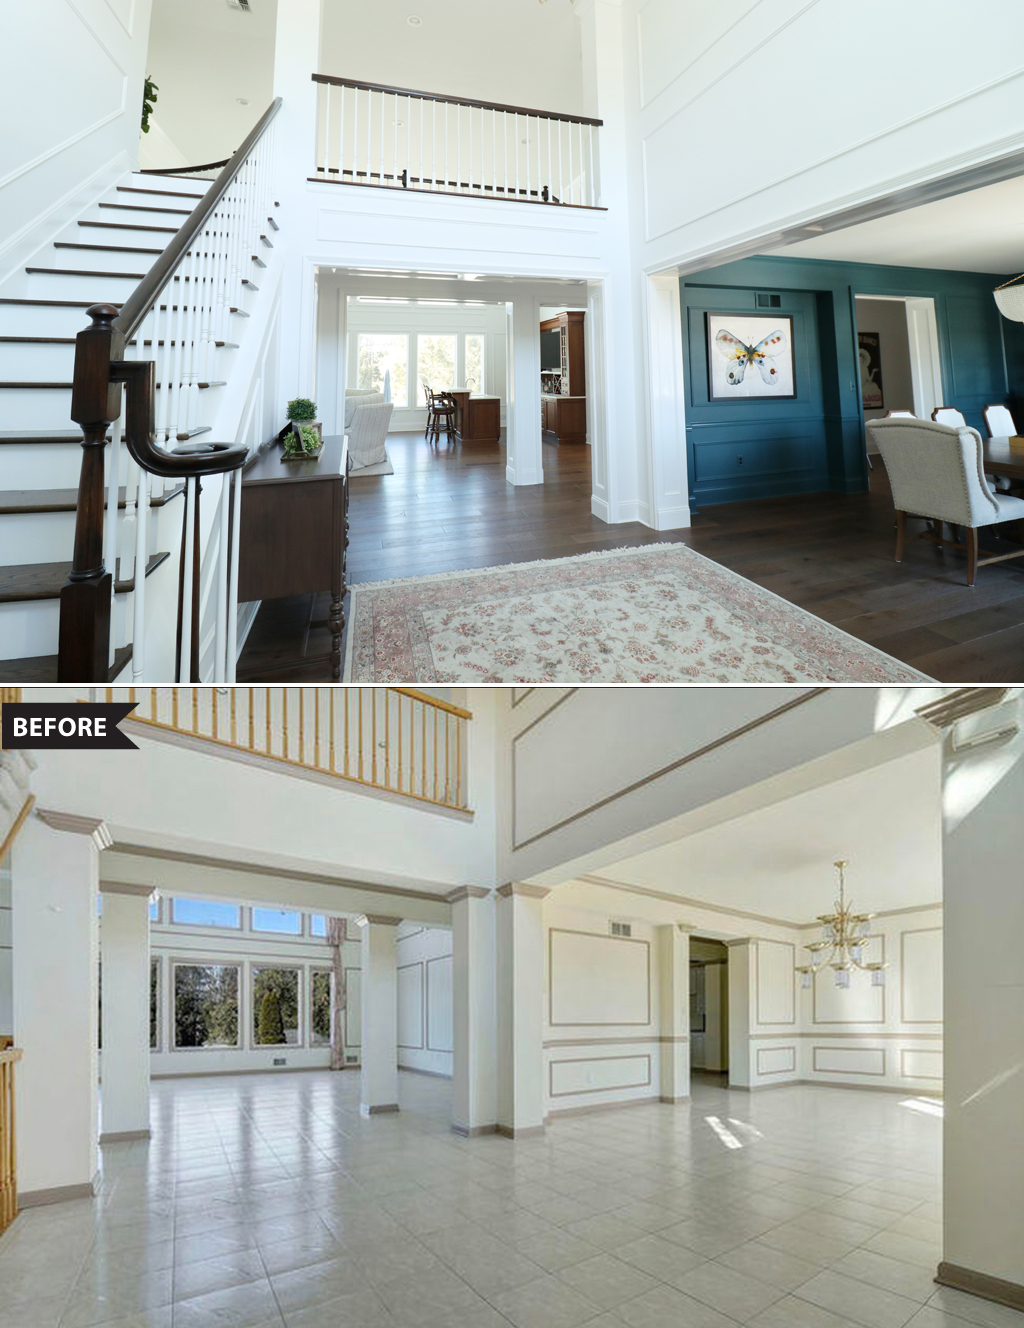 Before and After Photos of a Home Remodel in Monmouth County NJ